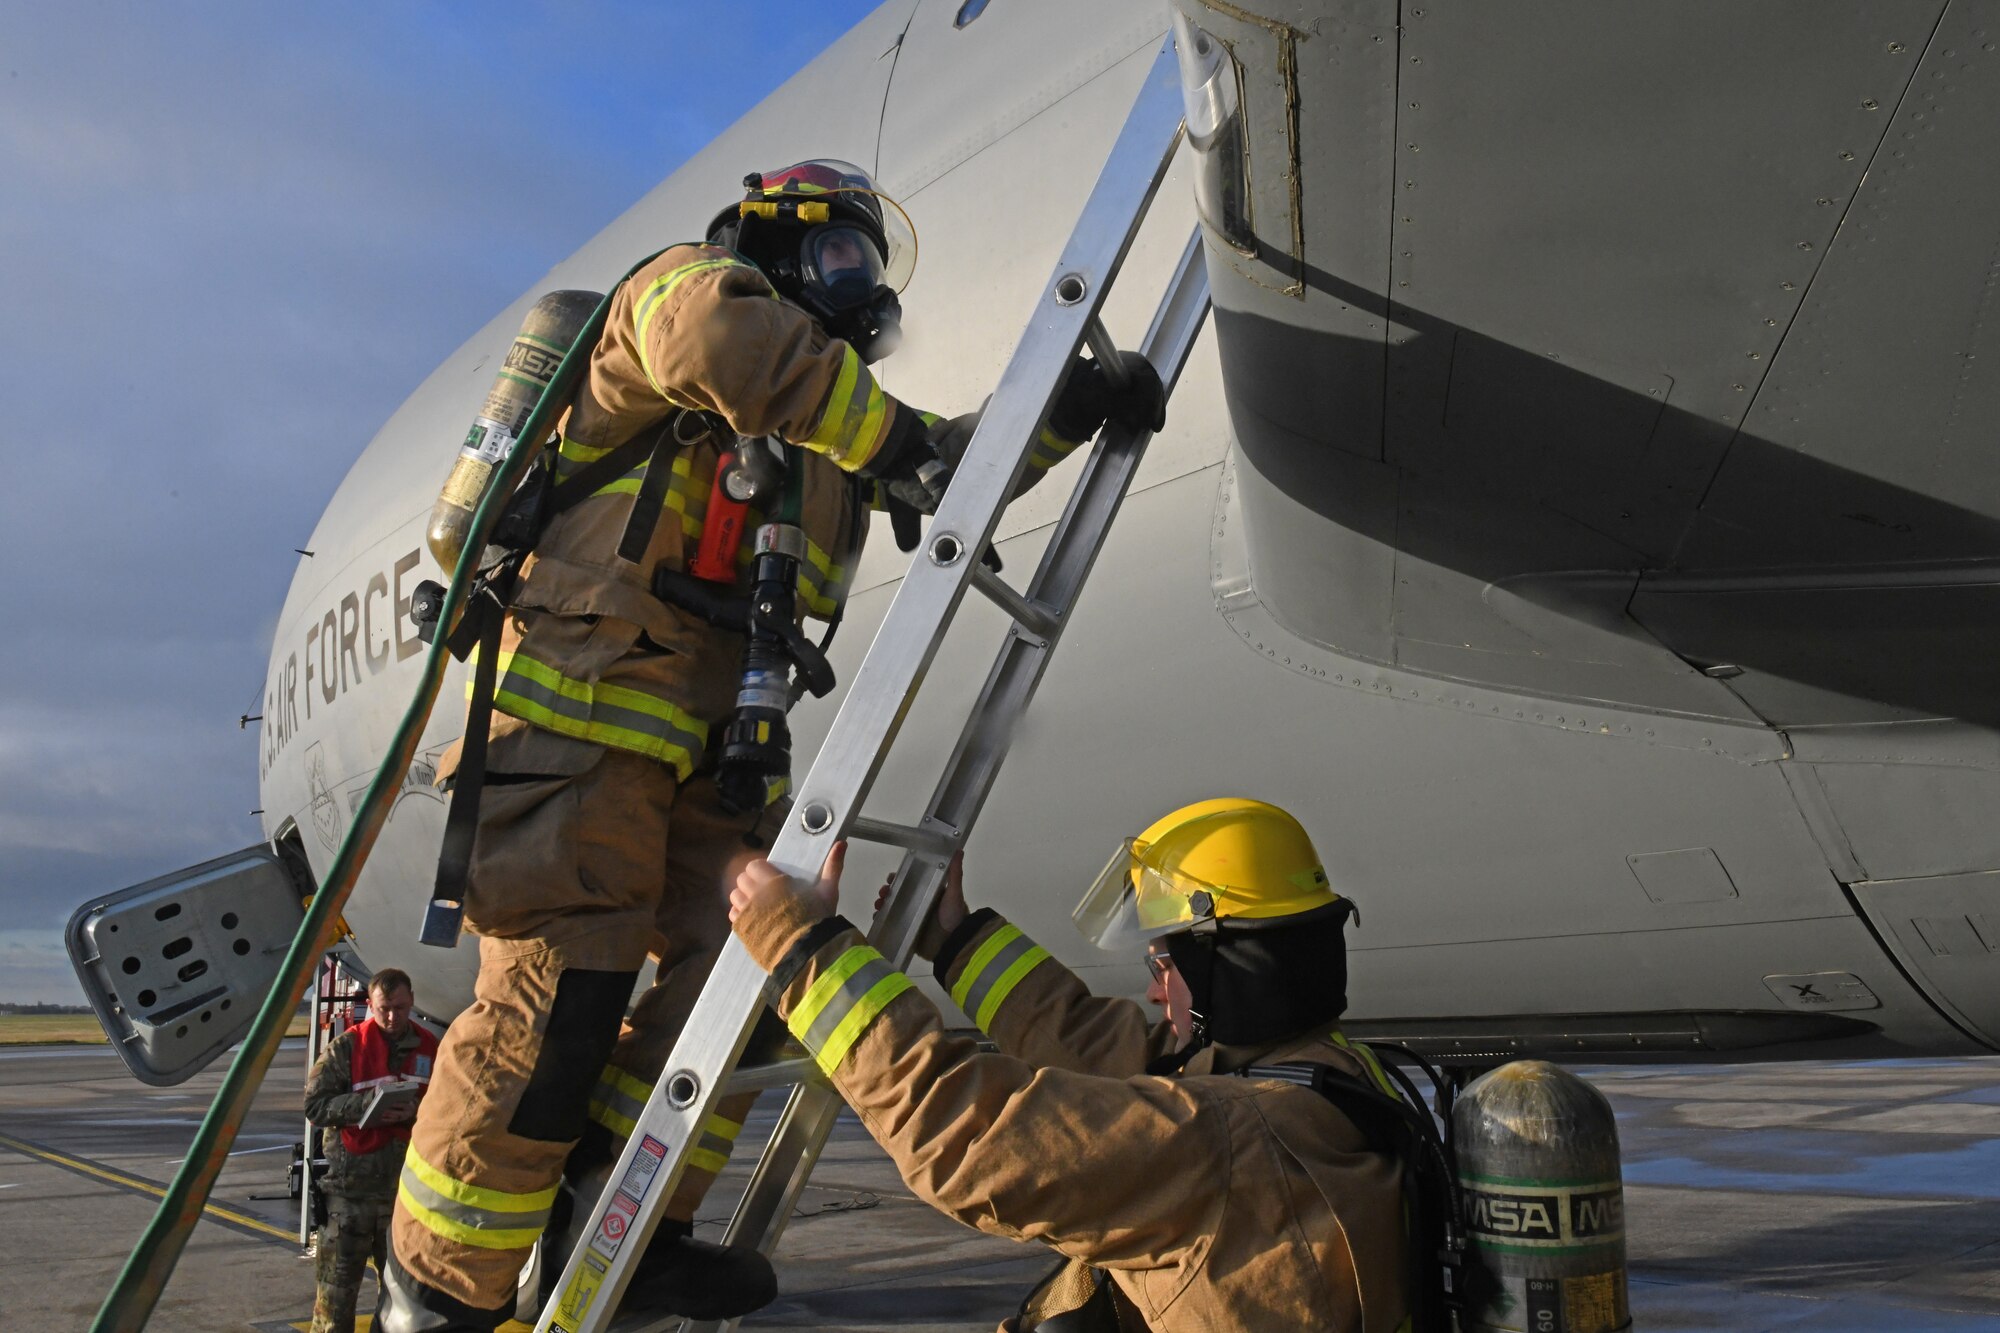 A firefighter assigned to the 100th Civil Engineer Squadronclimbs a ladder to reach the wing of a KC-135 Stratotanker aircraft during a simulated aircraft mishap at Royal Air Force Mildenhall, England, Nov. 4, 2021. The aircraft mishap simulated the aircraft skidding along the runway due to a nose landing gear failure, allowing emergency service personnel the opportunity to practice how they would respond in case of a real life incident. (U.S. Air Force photo by Tech. Sgt. Anthony Hetlage)